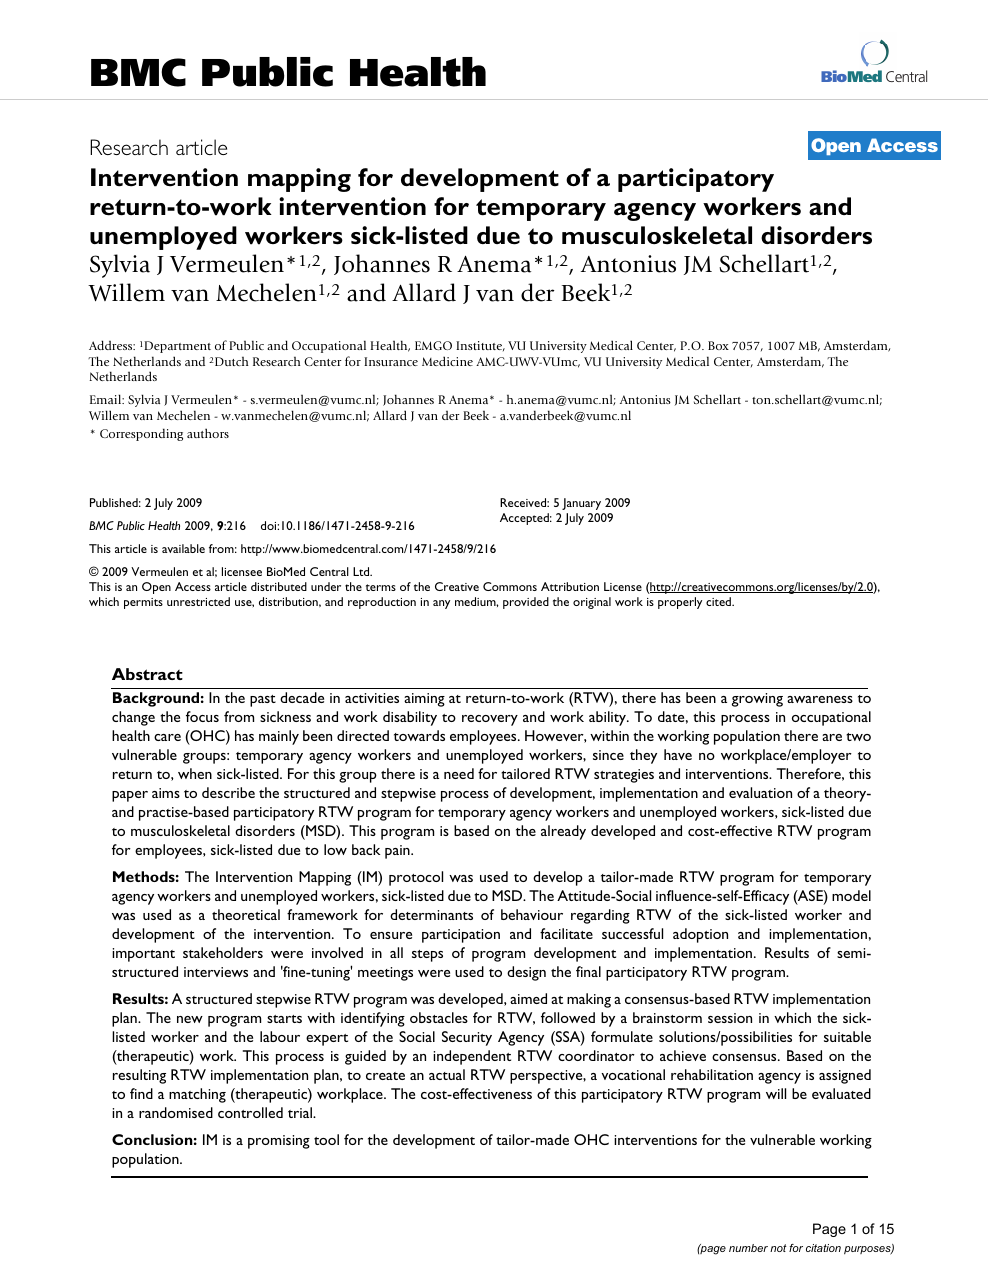 Intervention Mapping For Development Of A Participatory Return To Work Intervention For Temporary Agency Workers And Unemployed Workers Sick Listed Due To Musculoskeletal Disorders Topic Of Research Paper In Economics And Business Download Scholarly